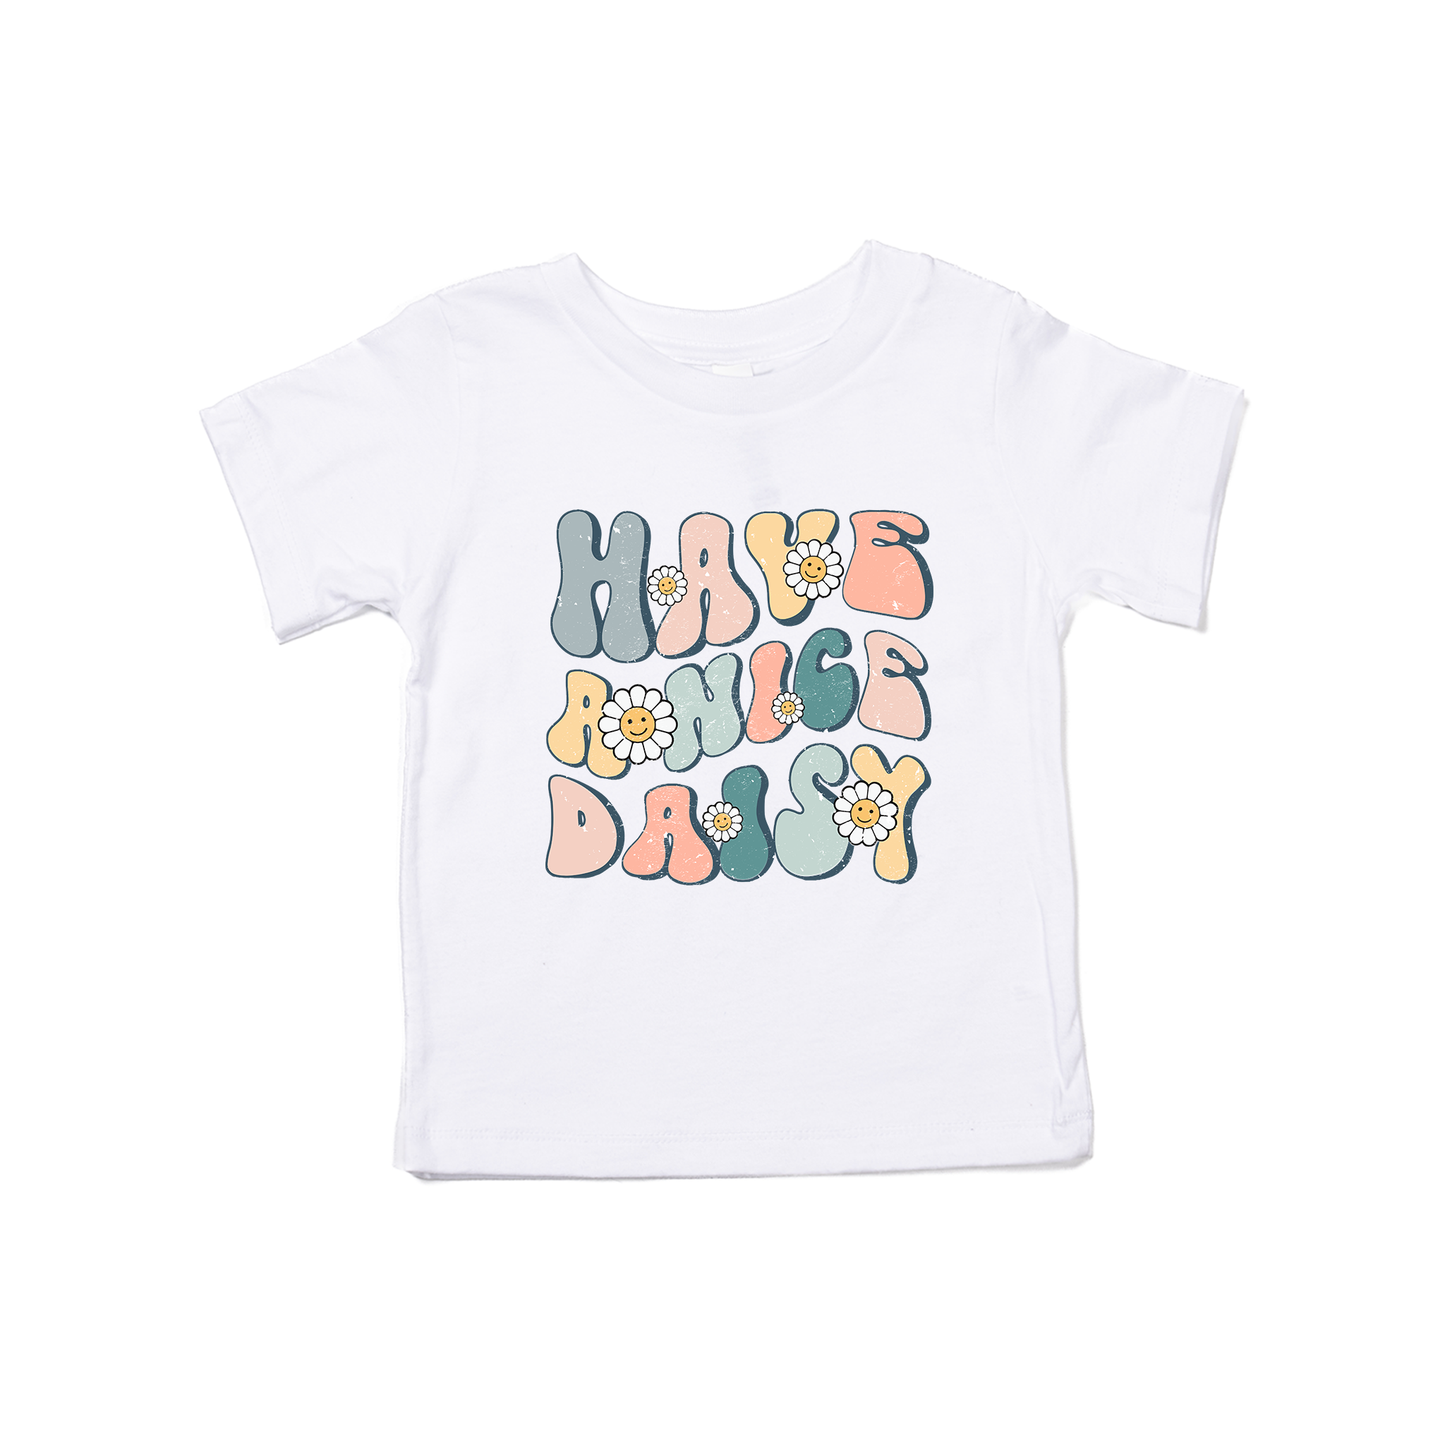 Have a Nice Daisy - Kids Tee (White)